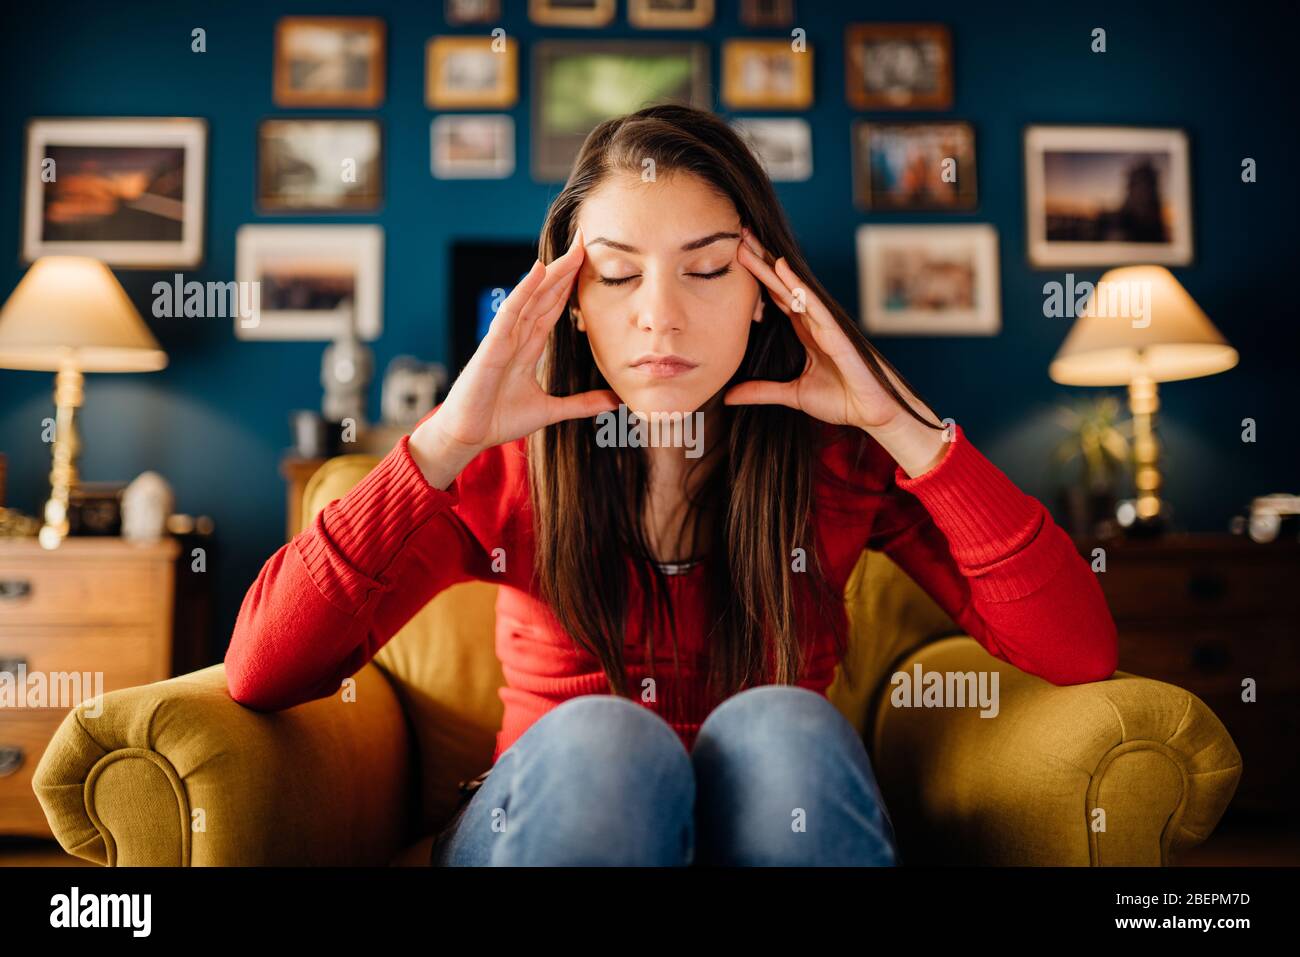 Stressed woman overthinking events alone at home.Thinking of problems.Concentration problems.Brain/cognitive/neurological activity stimulation.Memory Stock Photo